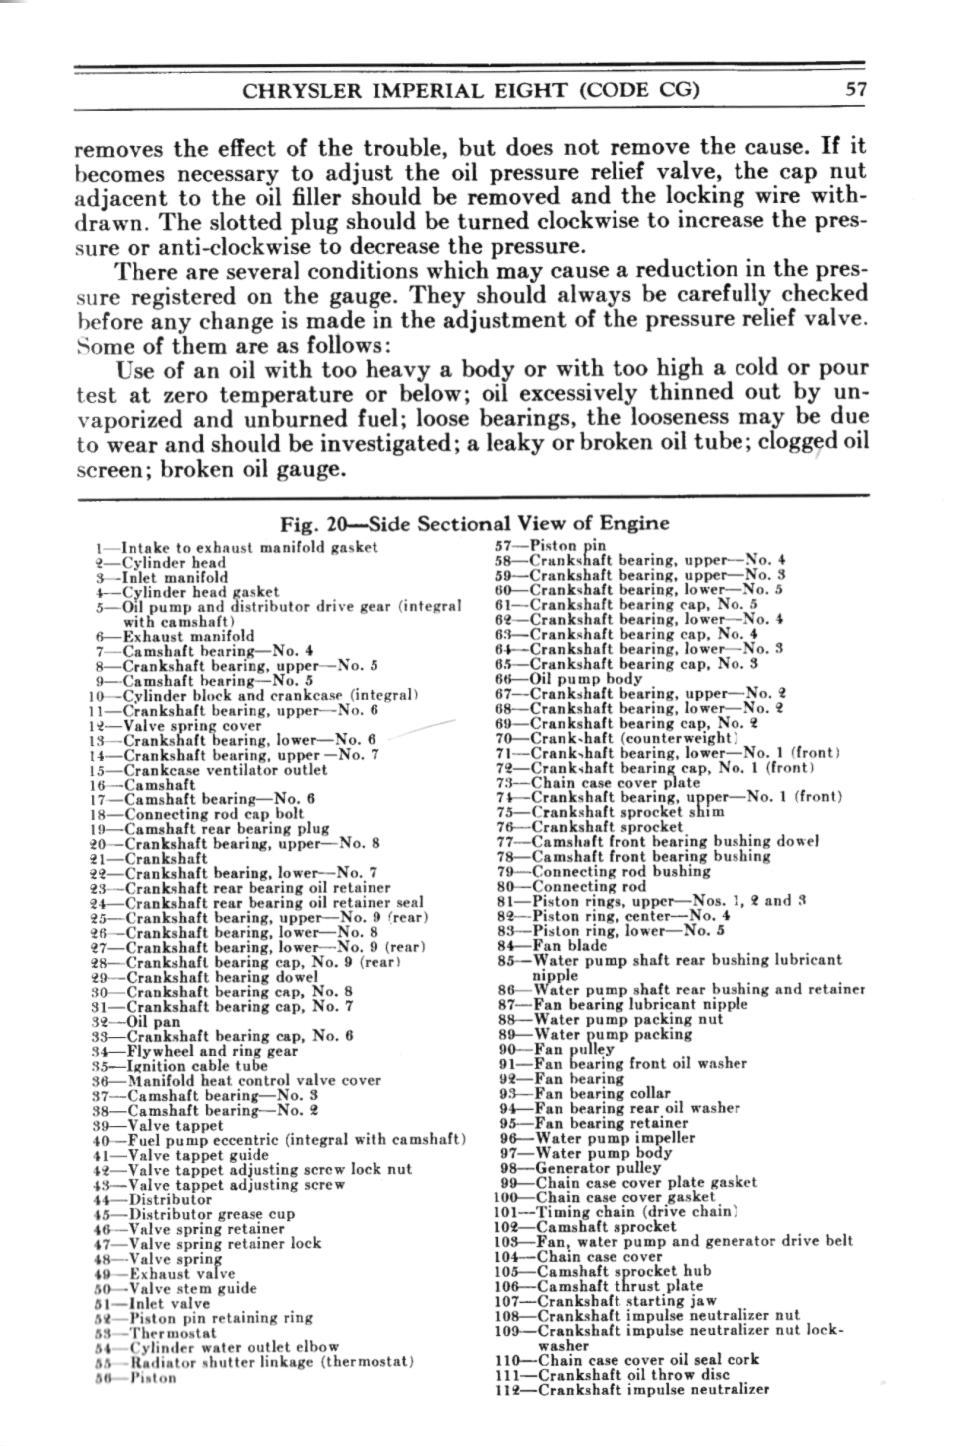 1931 Chrysler Imperial Owners Manual Page 57